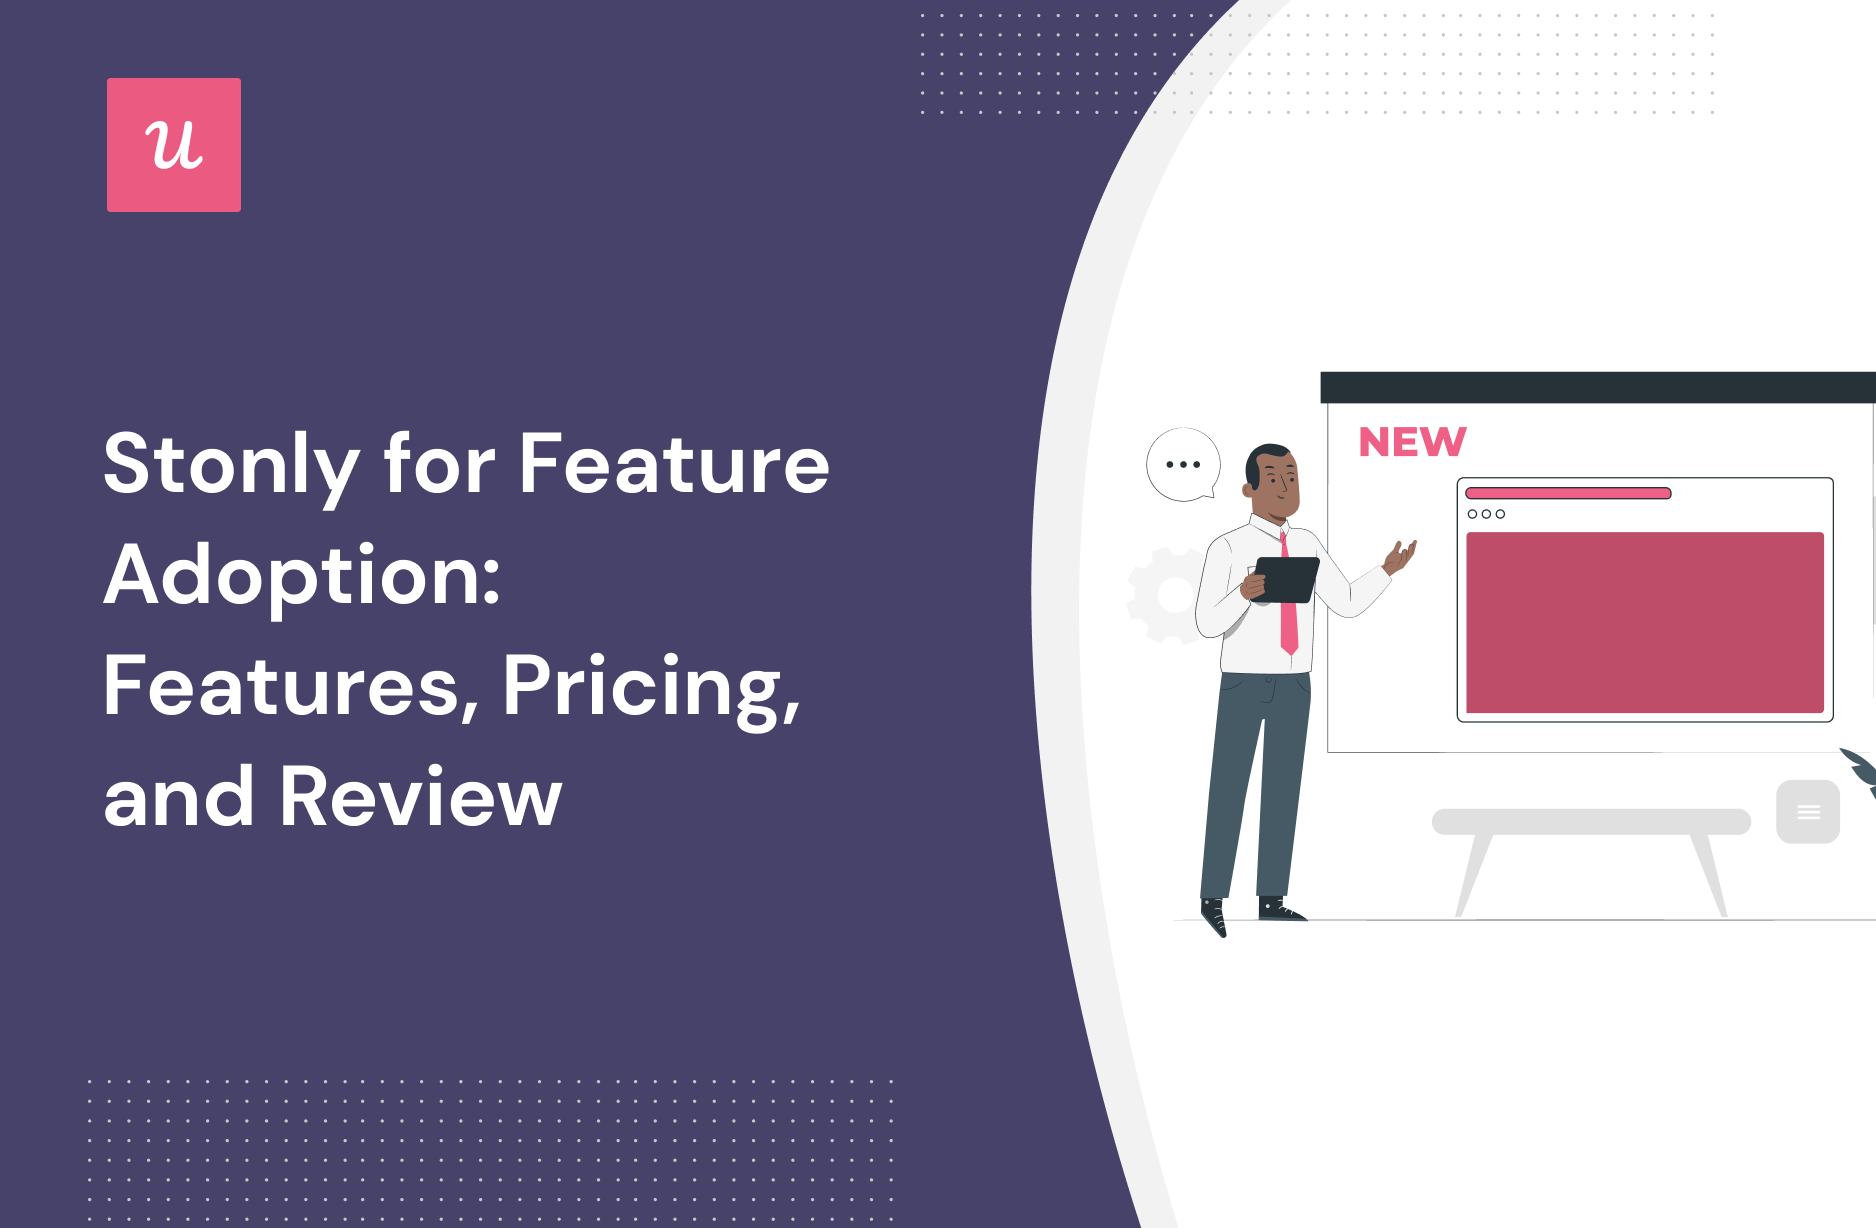 Stonly for Feature Adoption: Features, Pricing, and Review